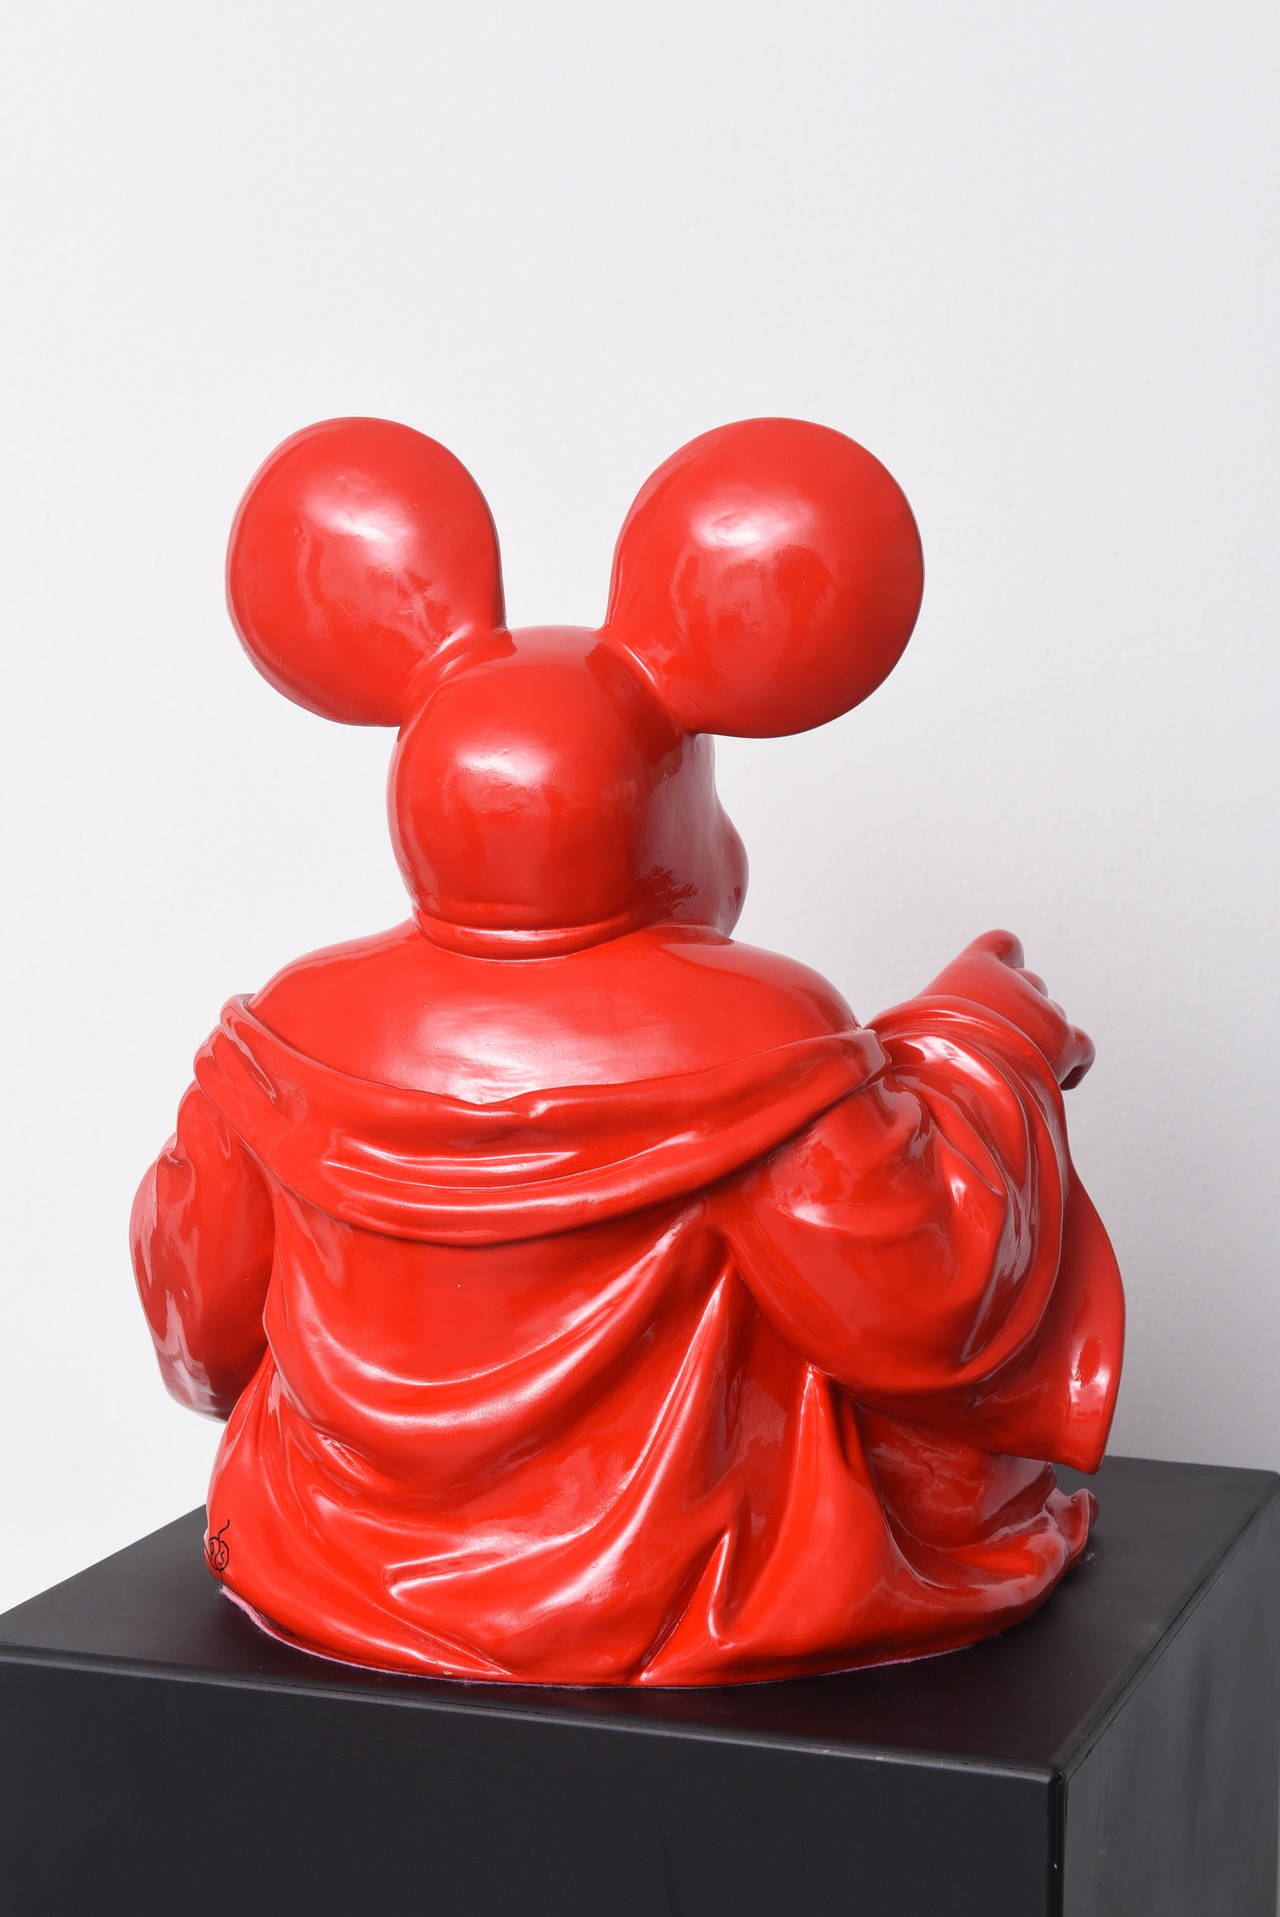 Red Boud'key - Fusion of Buddha and Mickey - Resin sculpture 1